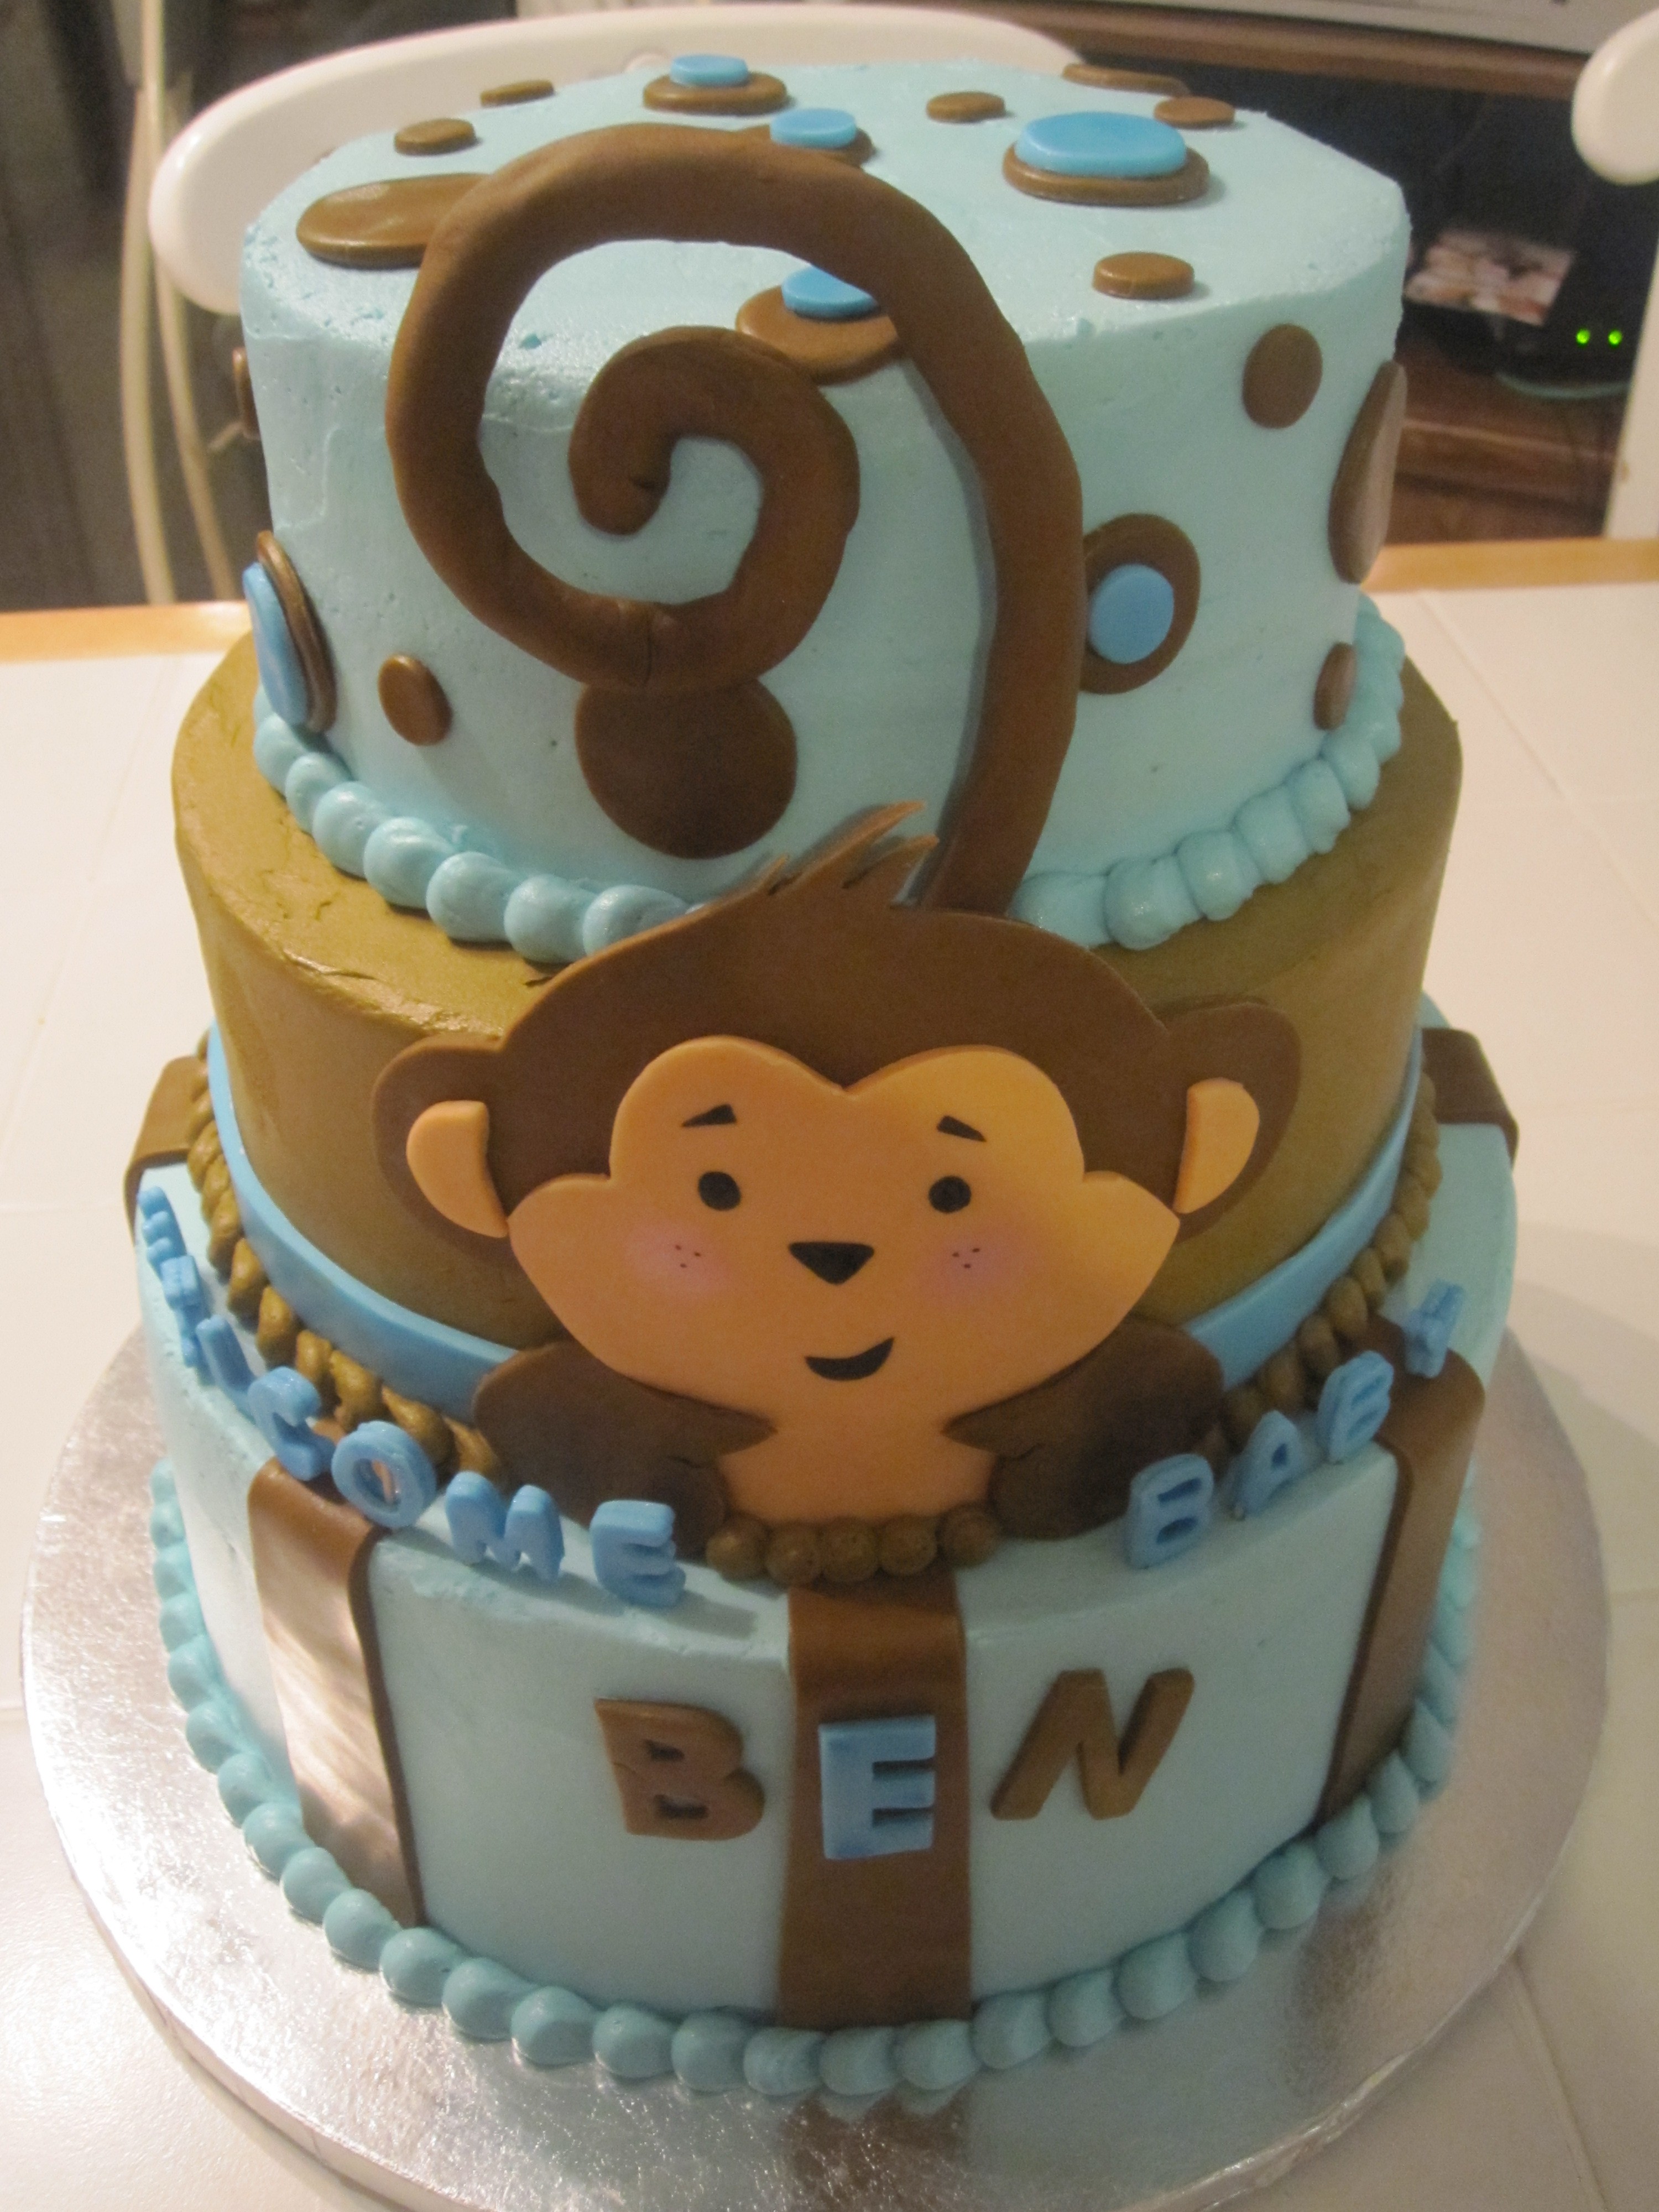 Baby Shower Cakes: Creating Designs